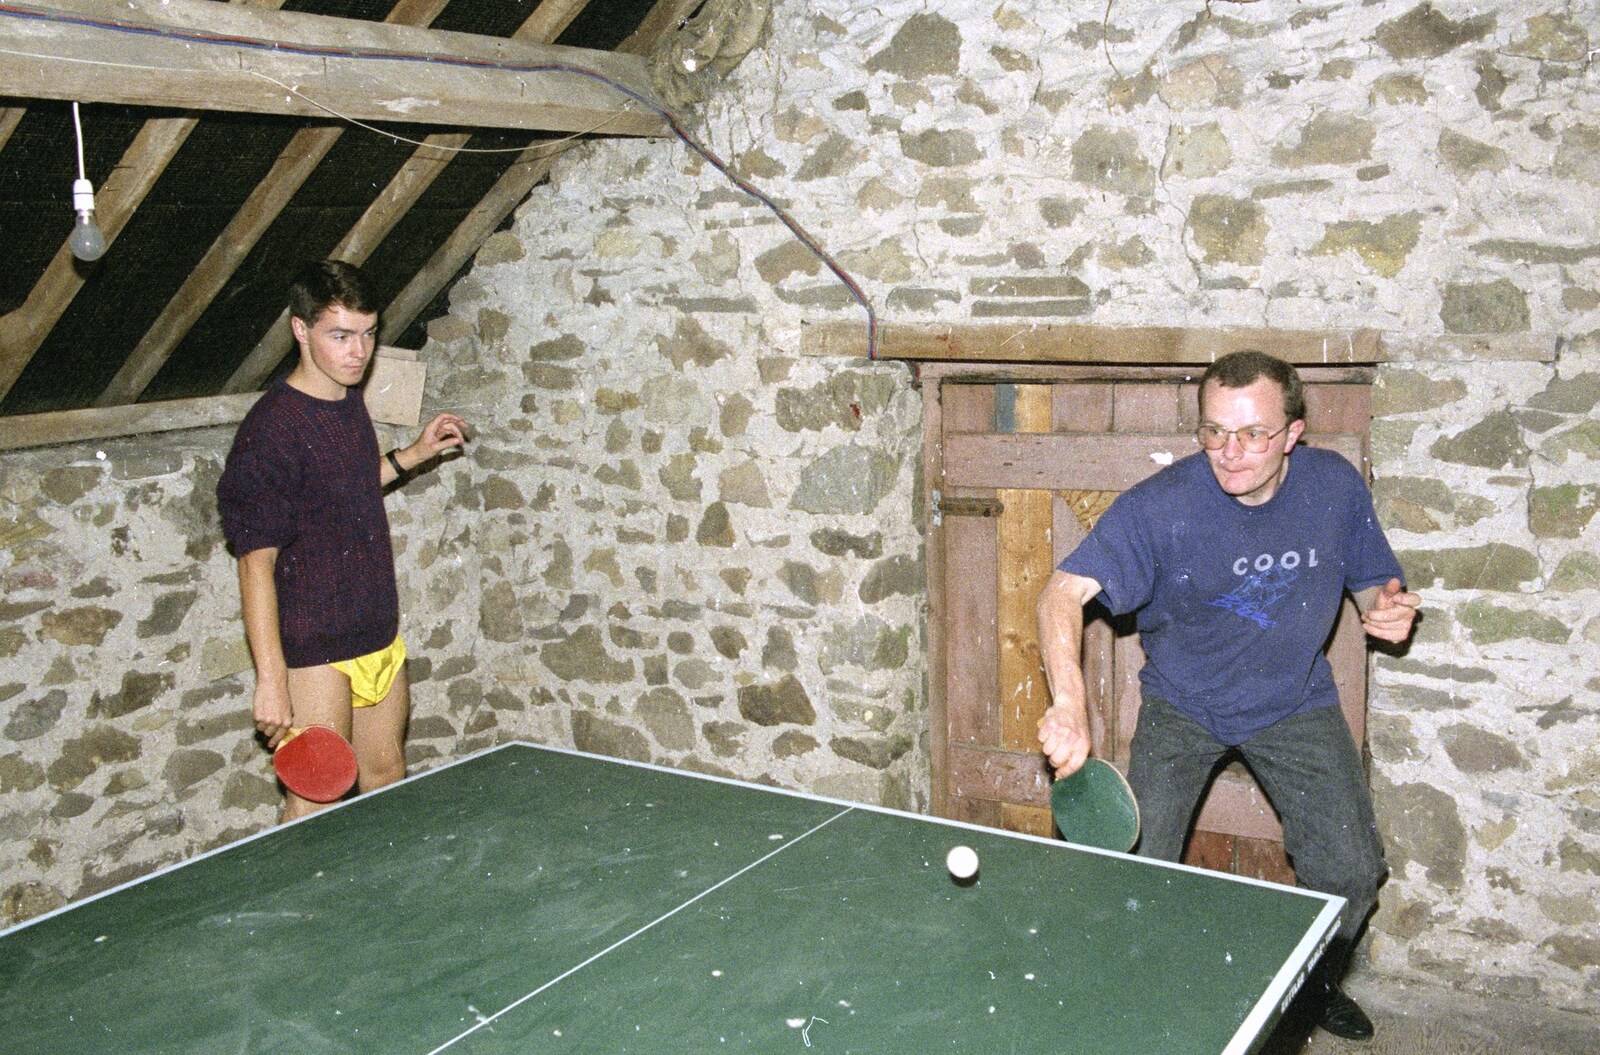 Liz's Party, Abergavenny, Monmouthshire, Wales - 4th August 1990: Hamish plays ping pong